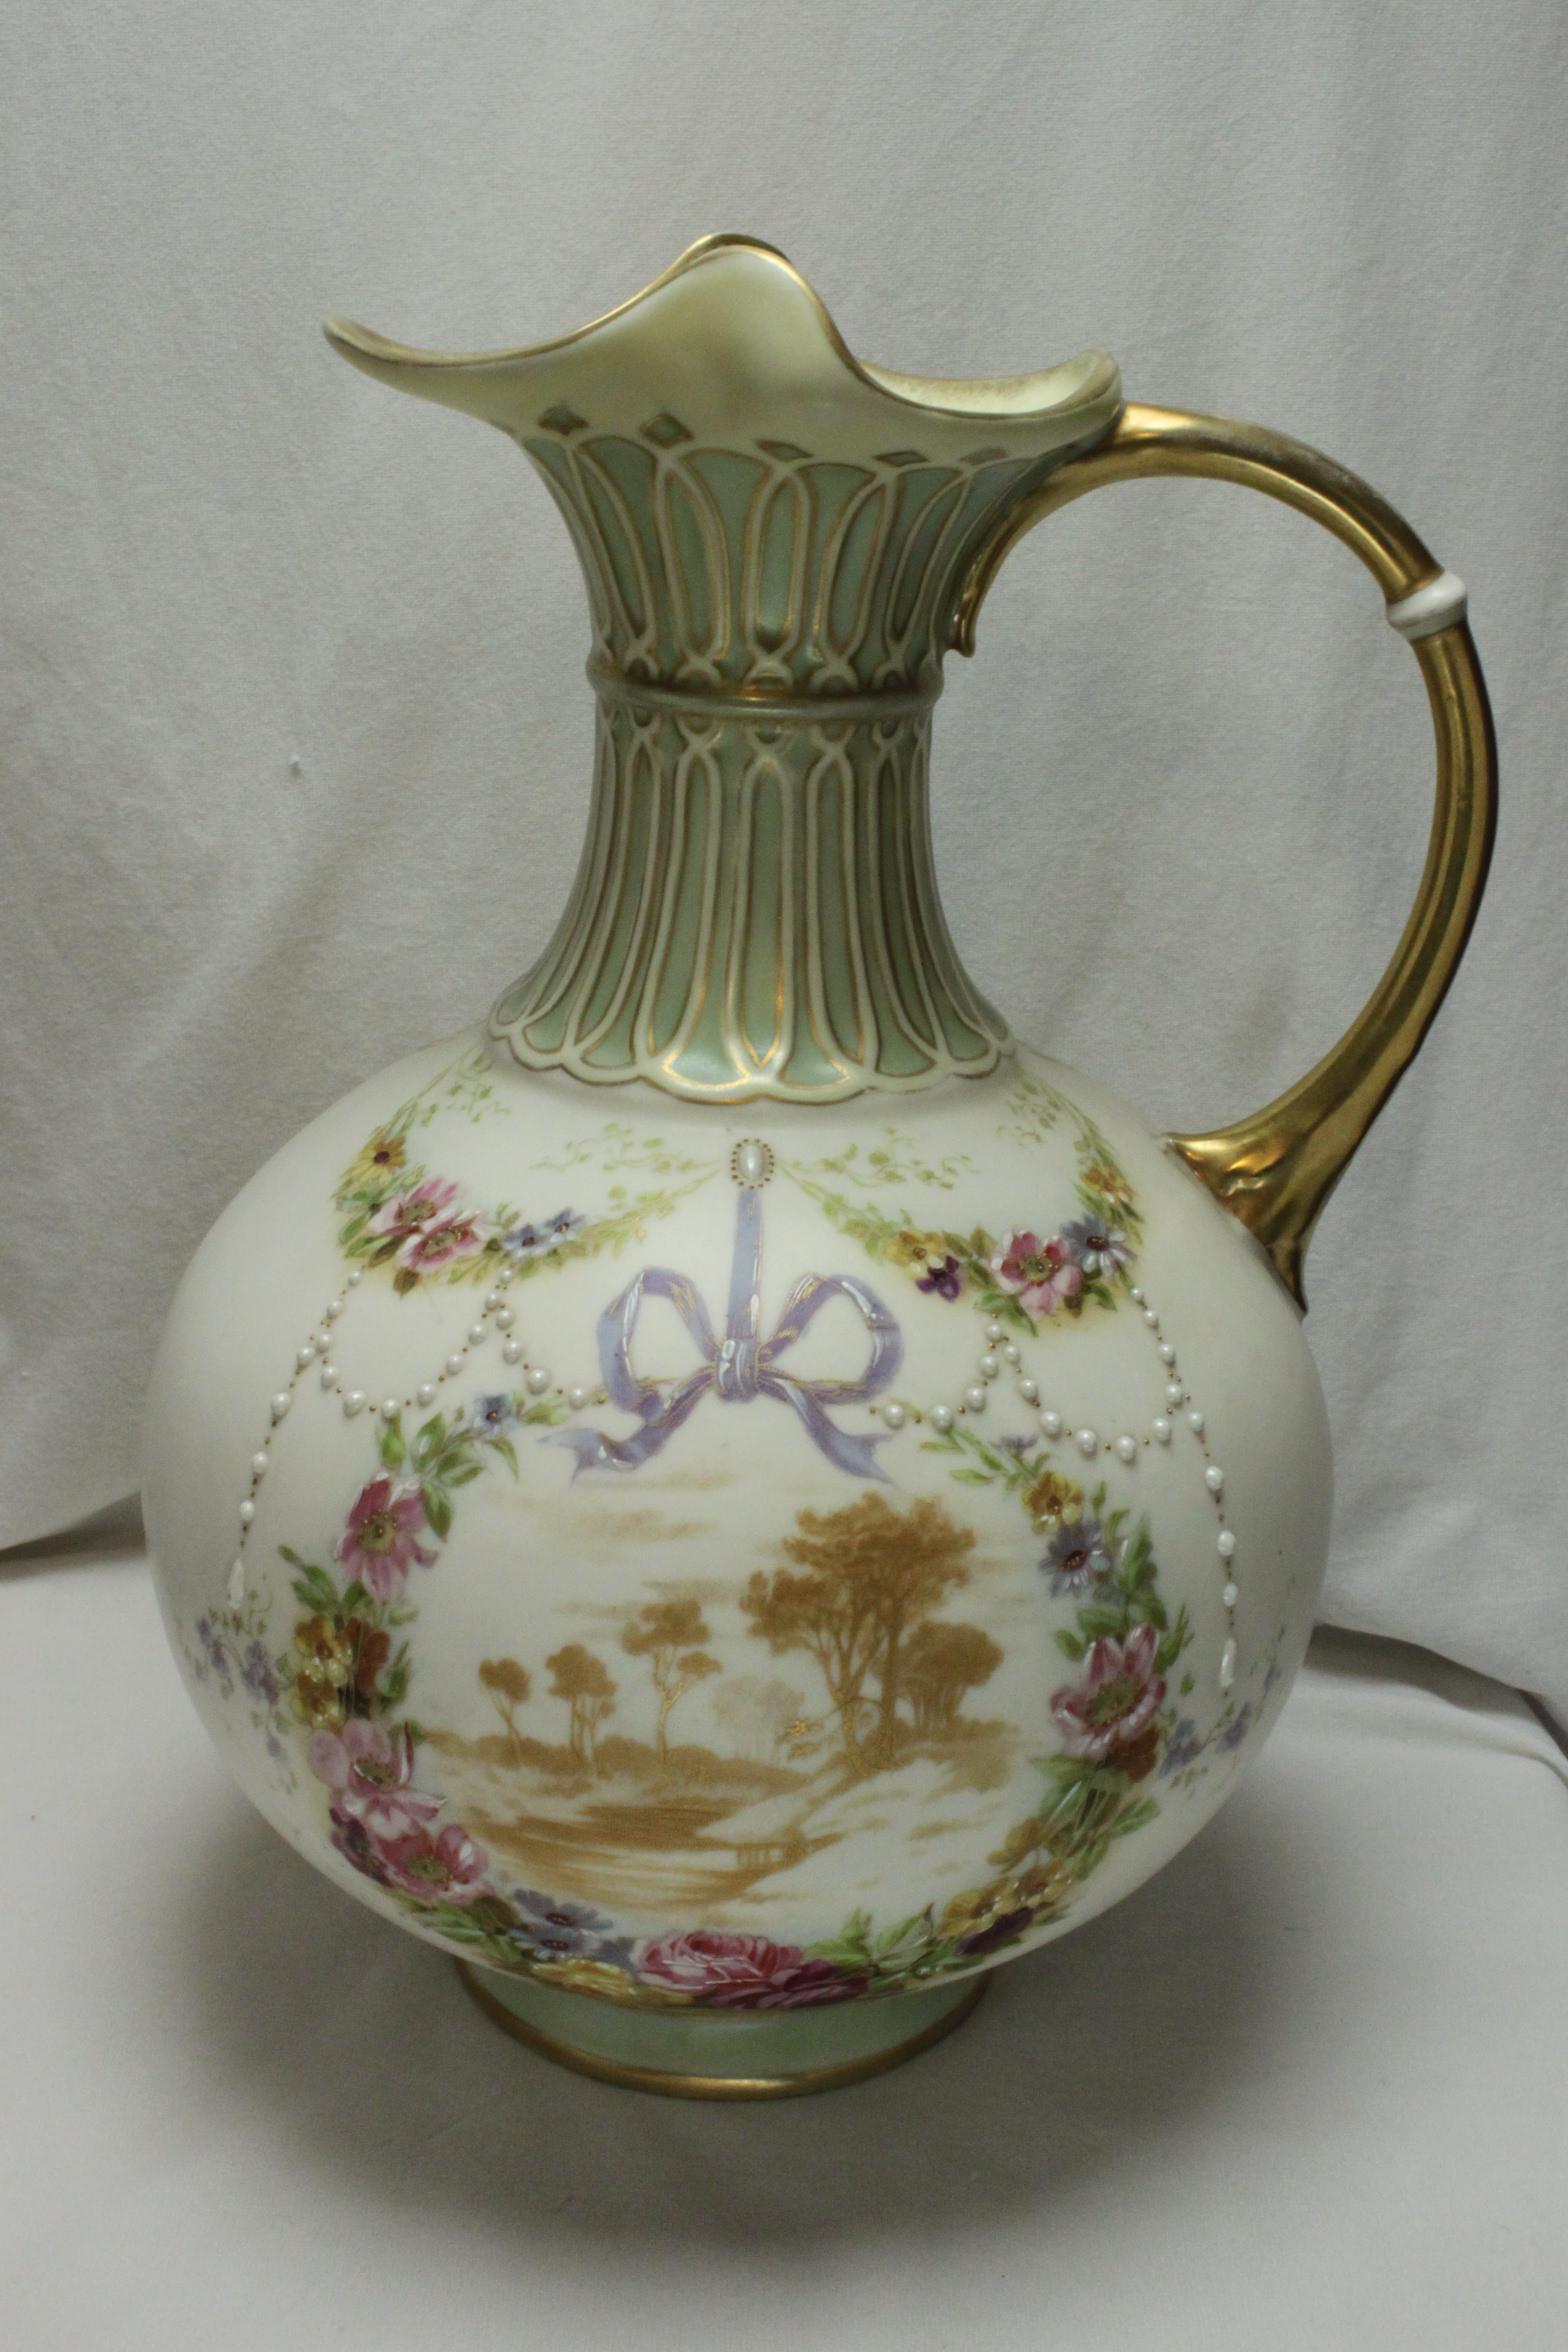 This very pretty painted and gilded parian jug or ewer, is decorated with hand painted ribbons, swags of jewelled and highlighted flowers and strings of jewelled pearls. In the centre is a rural scene, printed in gold and encircled by a cartouche of